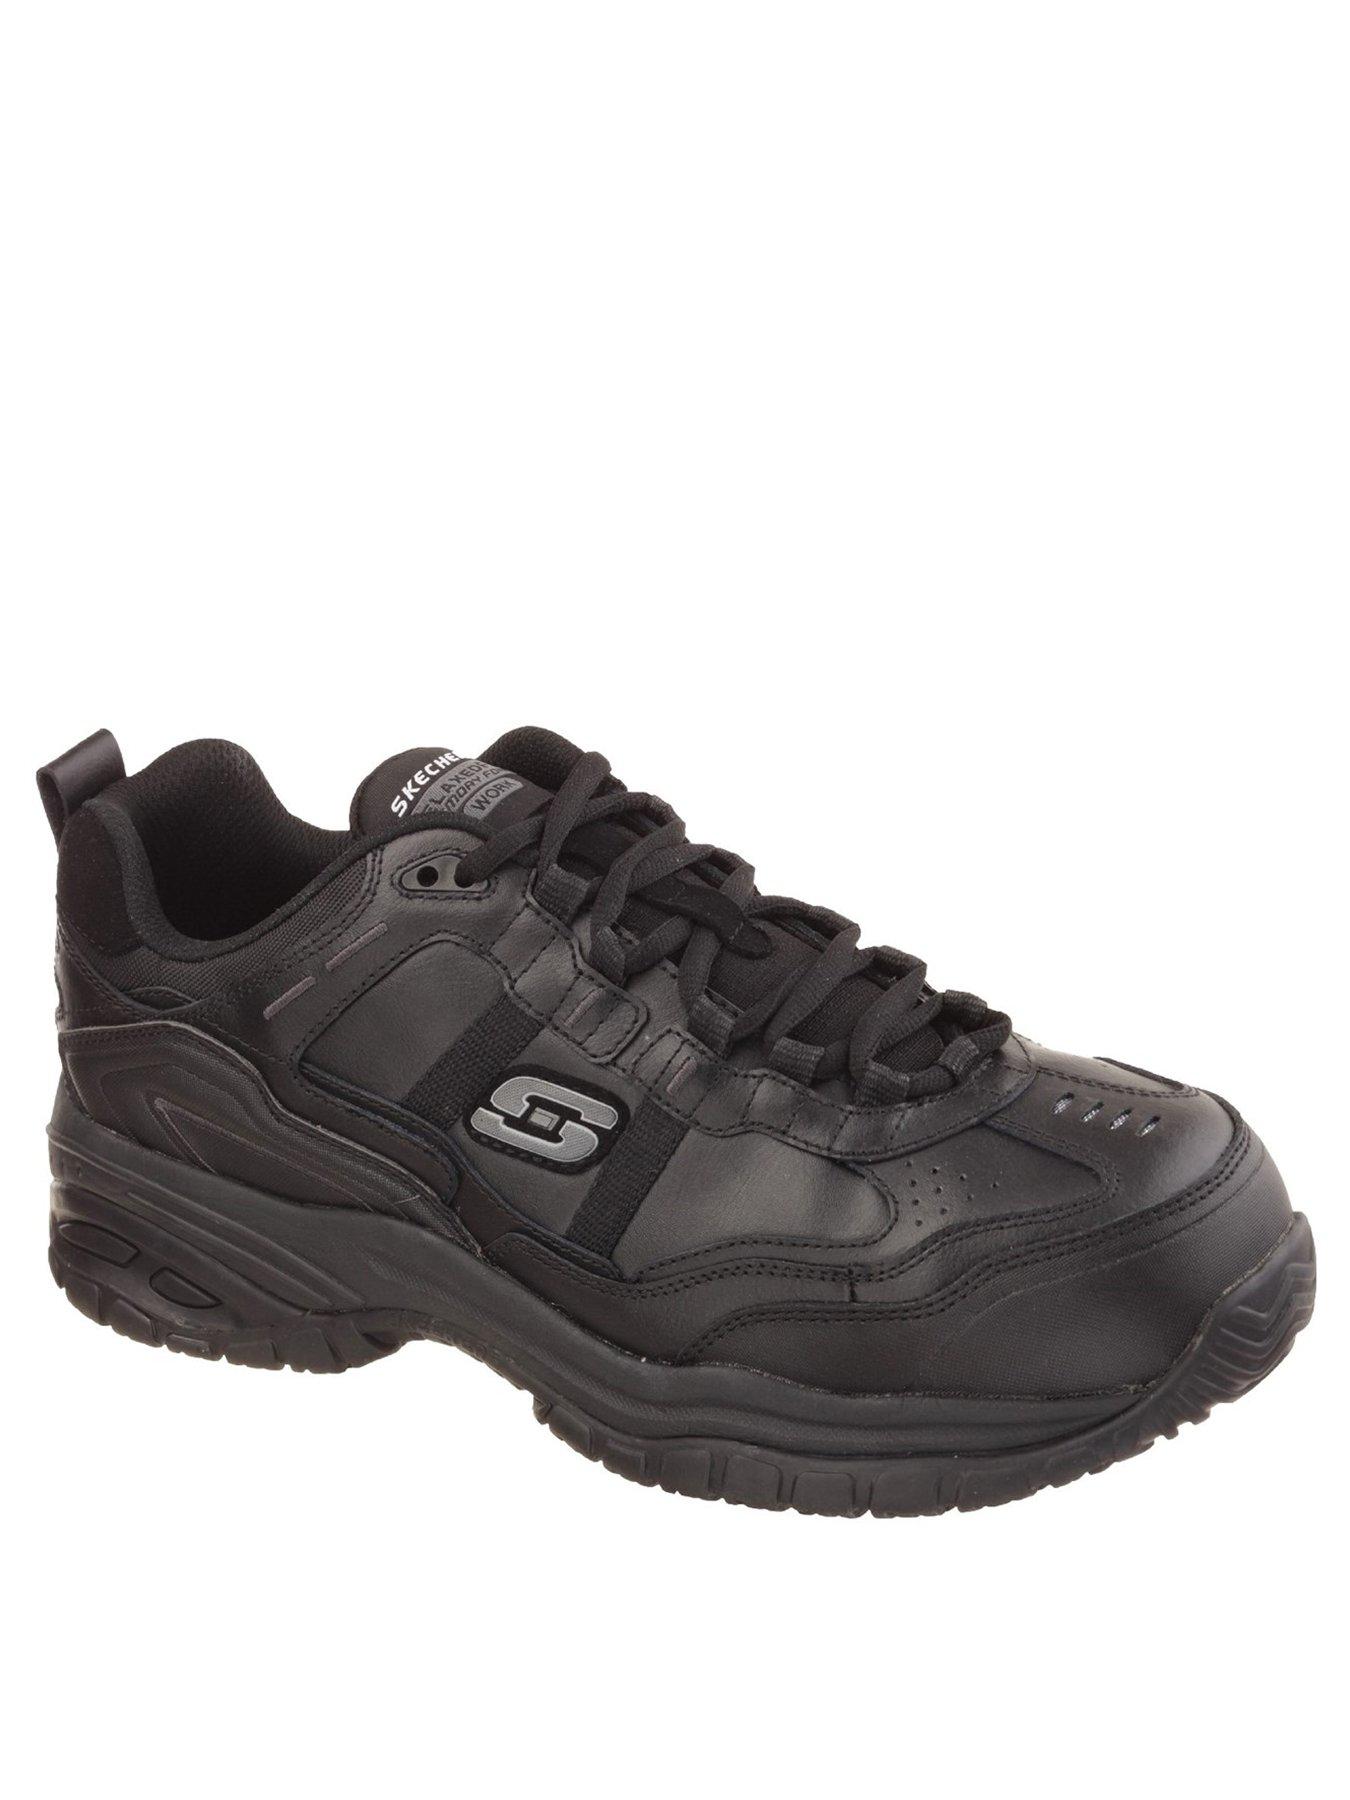 skechers work fit shoes